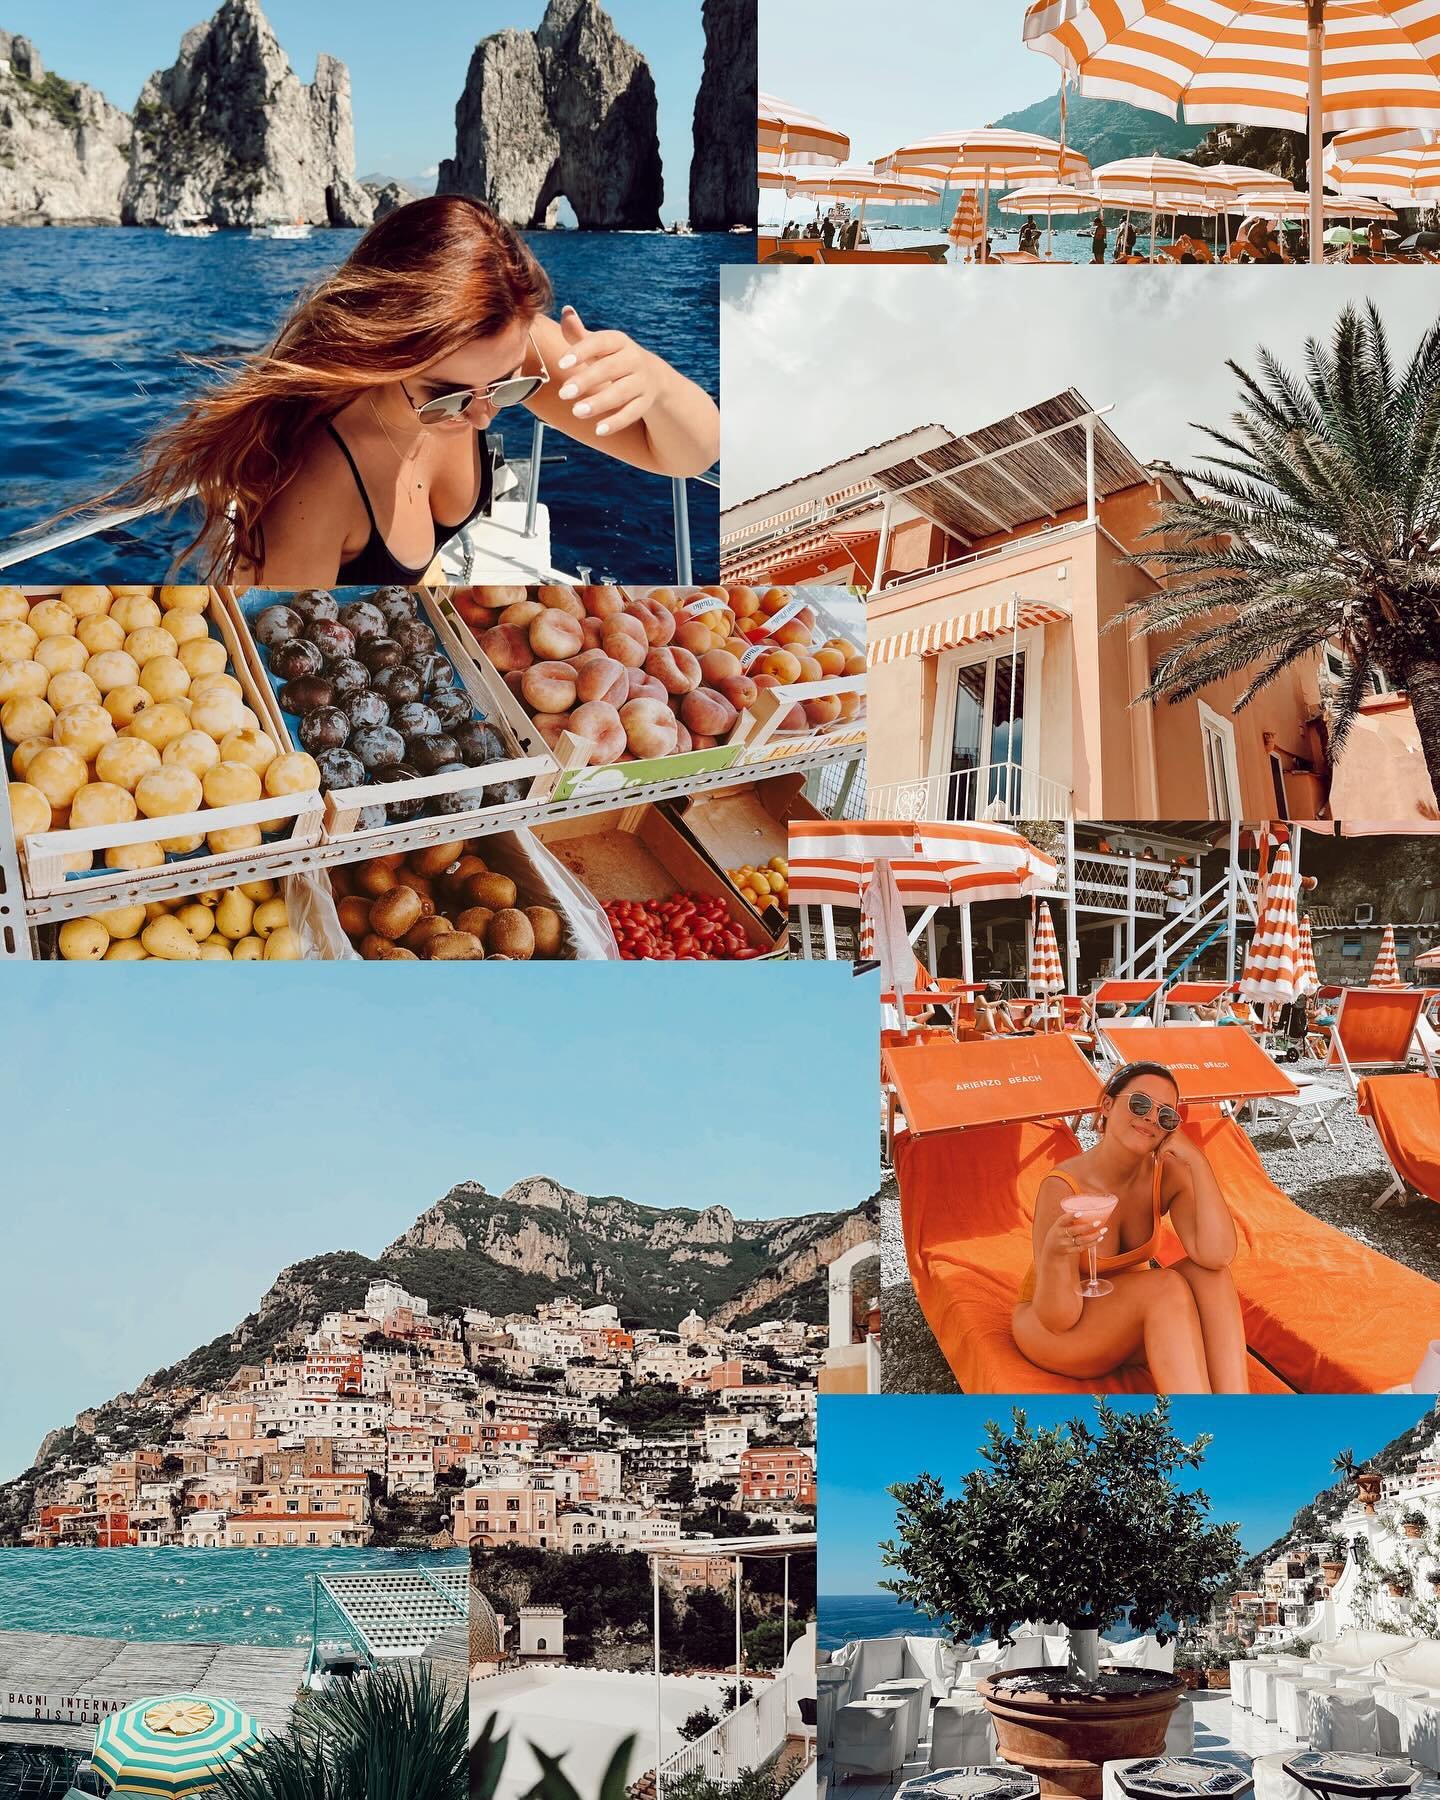 ✨🌞🍝 ITALIAN SUMMER MOOD BOARD 🇮🇹🌊🍊

Make no mistake: Positano looks every bit real, beautiful, and picturesque as photos show. My Italian summer moment was in September 2022 and it was everything you&rsquo;d hope for it to be. This was my third